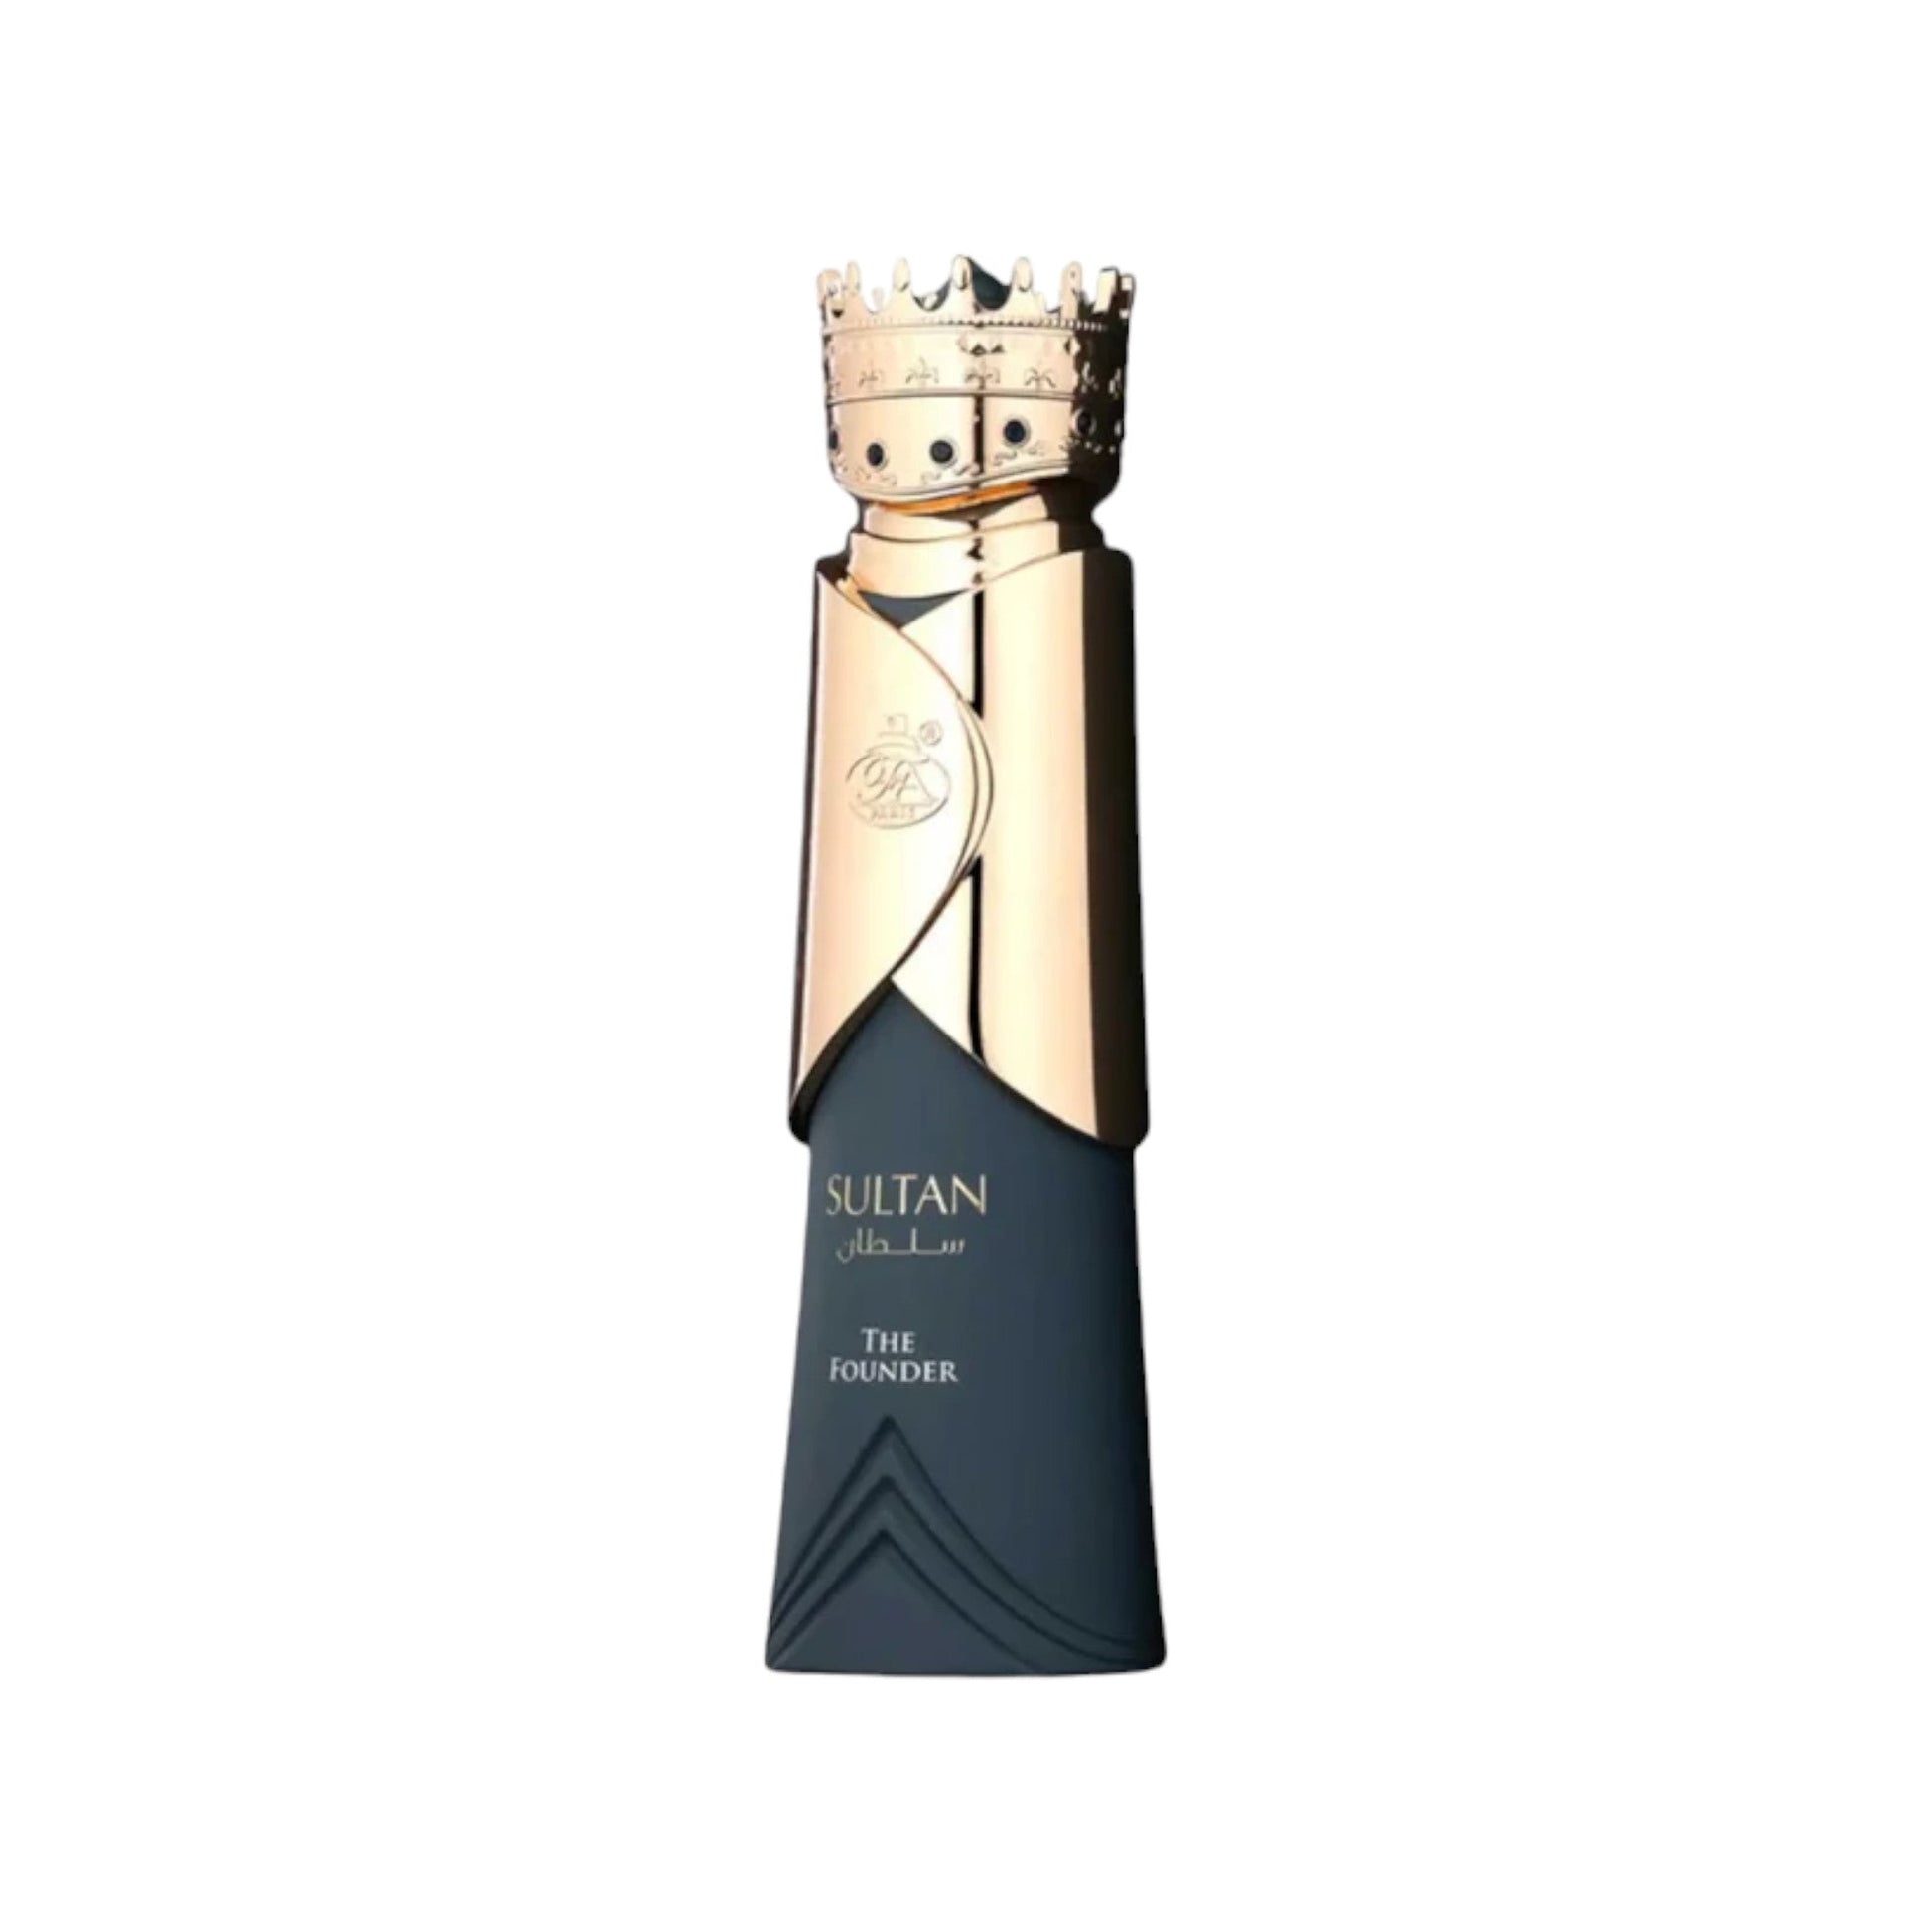 Sultan The Founder Perfume 80ml bottle, displaying its luxurious design and hinting at its rich blend of oud, amber, and patchouli notes.